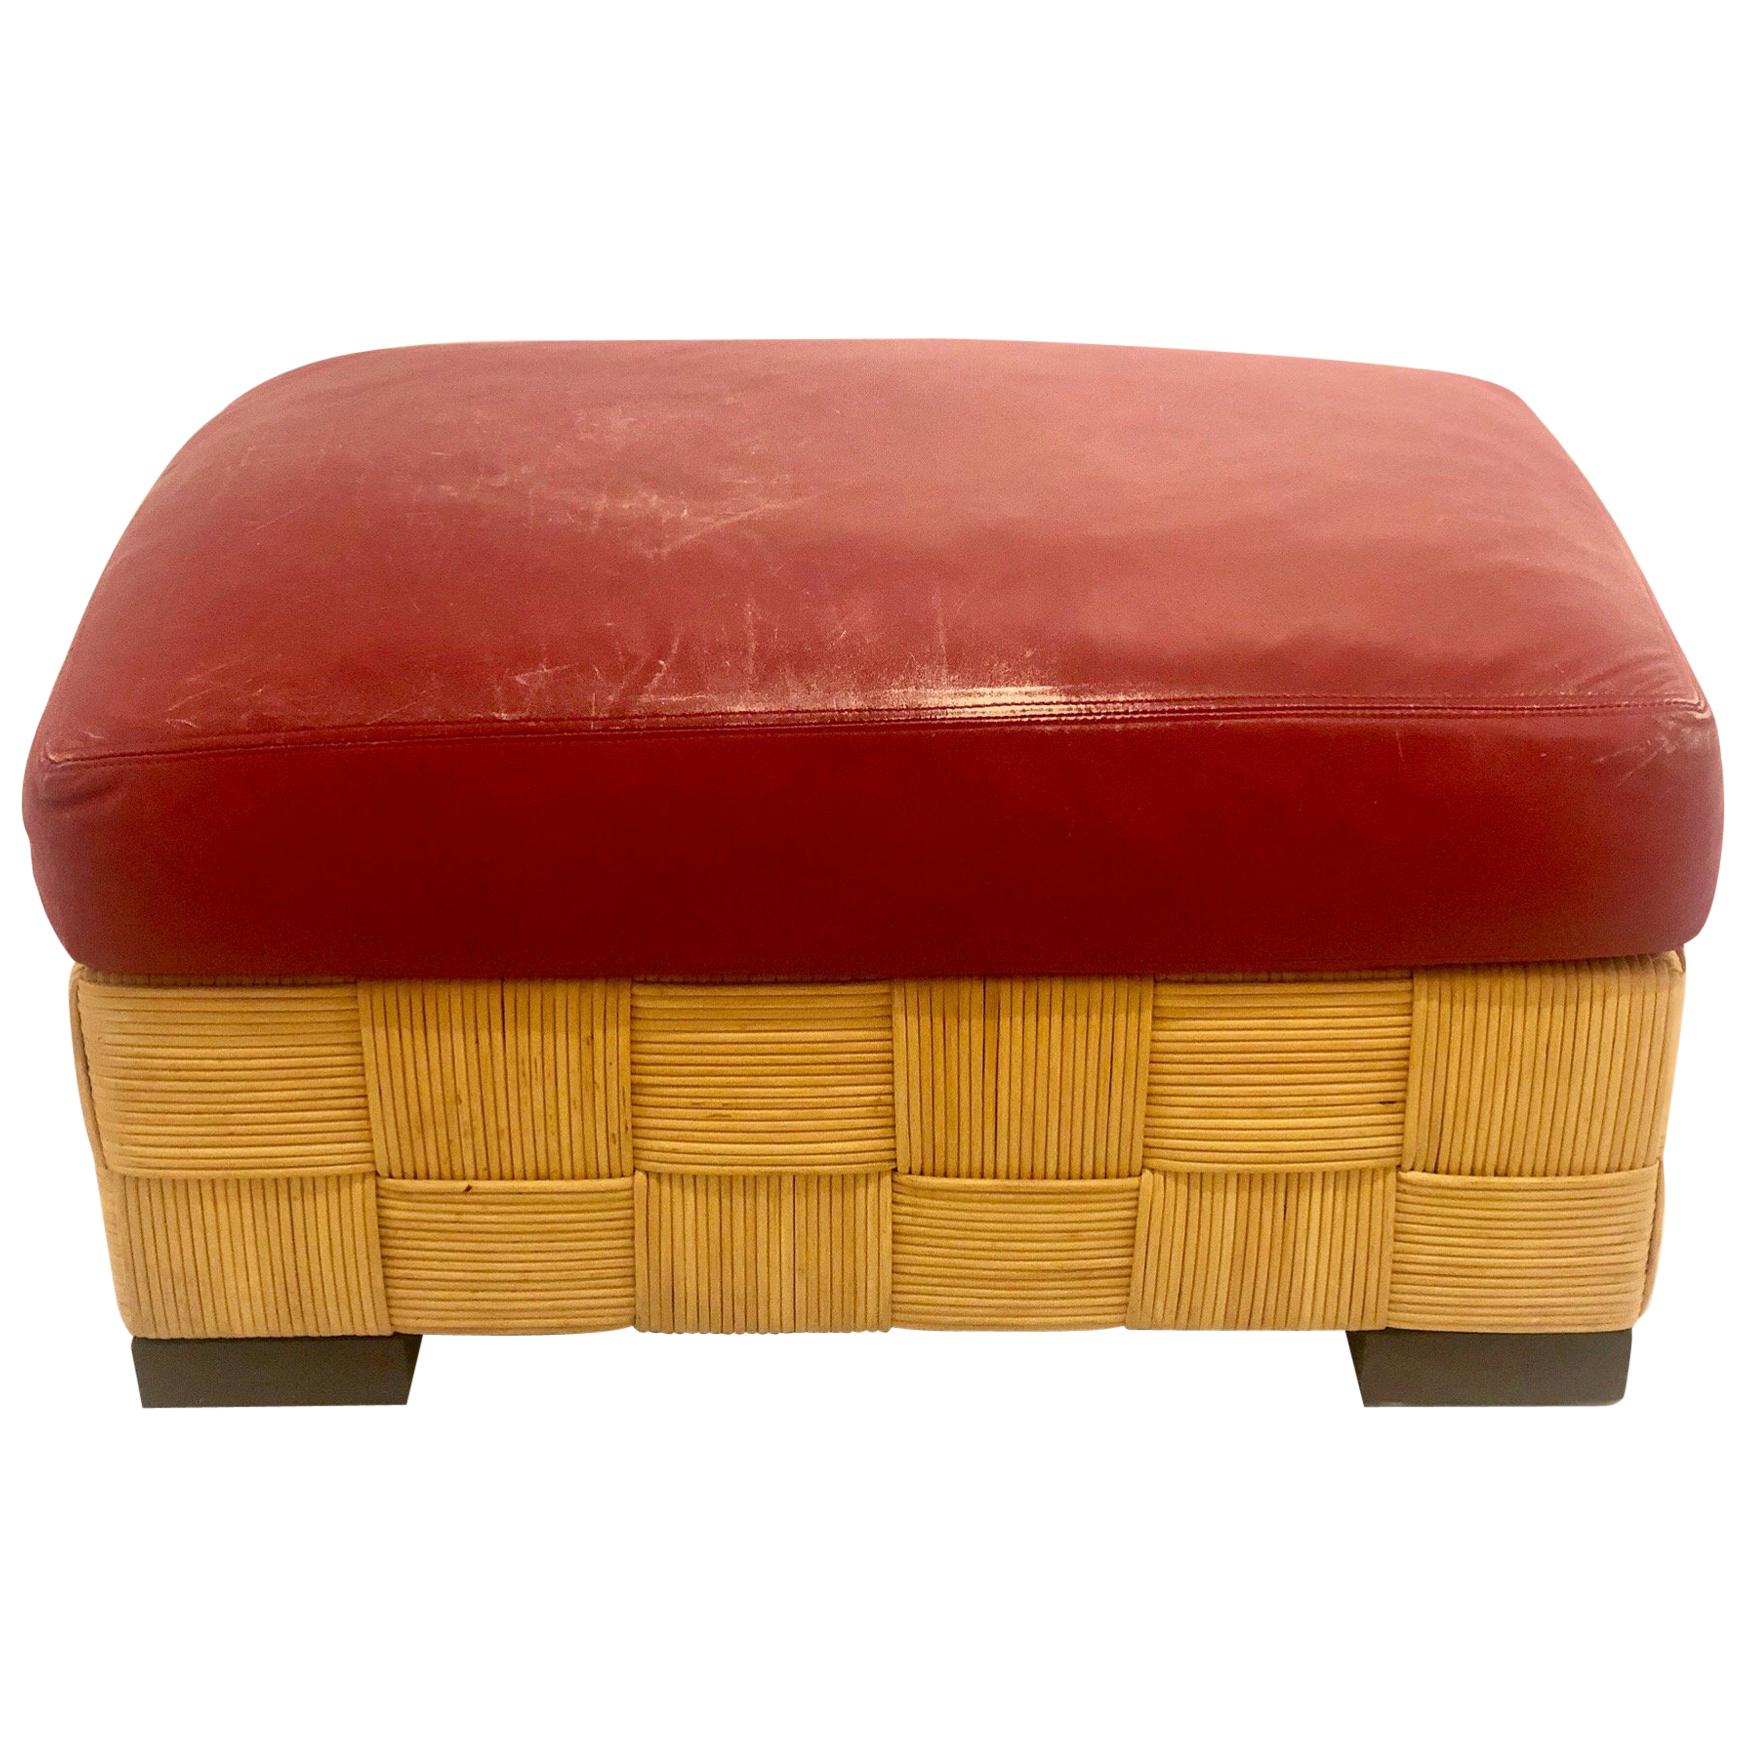 Wonderful designed, these Island inspired wicker ottomans by John Hutton, are heavy and well constructed. With nicely worn red leather cushions and dark walnut finish feet, incredible construction and quality, the cushions are nicely worn as seen on